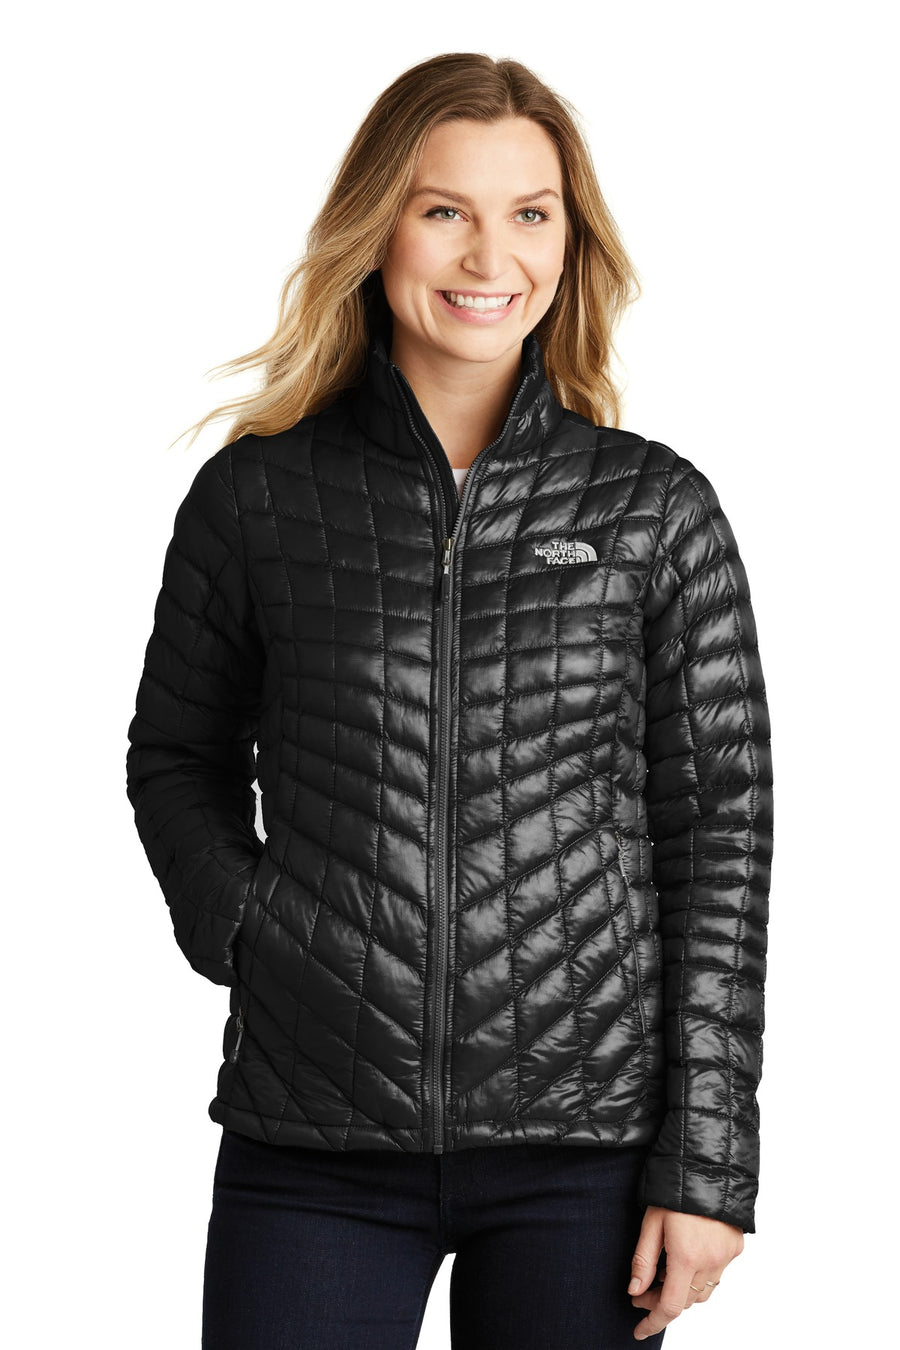 The North Face ThermoBall Trekker Jacket.